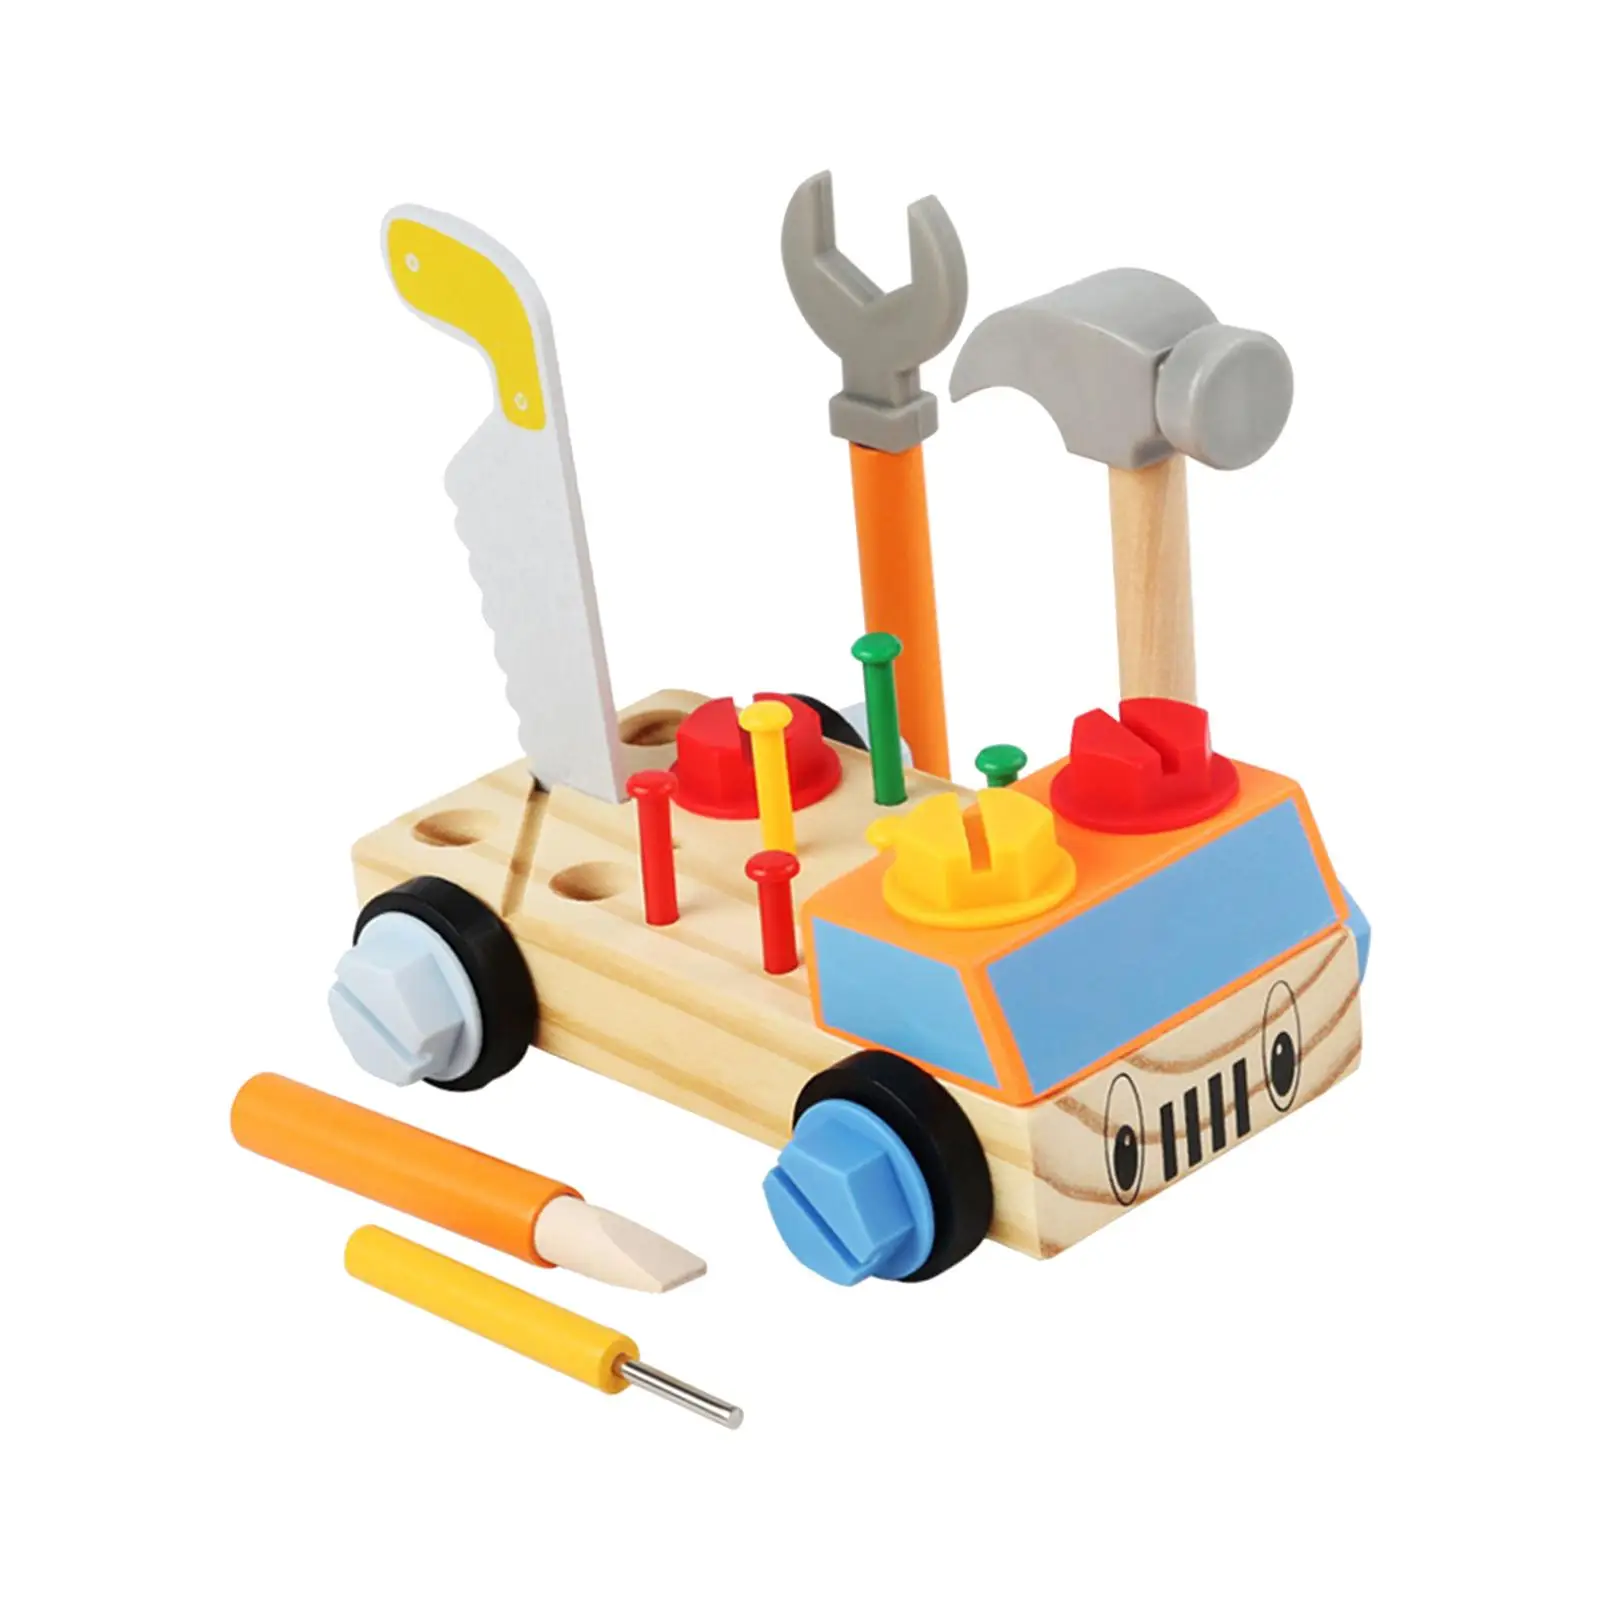 Wooden Play Tool Set Early Educational Pretend Play Motor Skills for Ages 3+